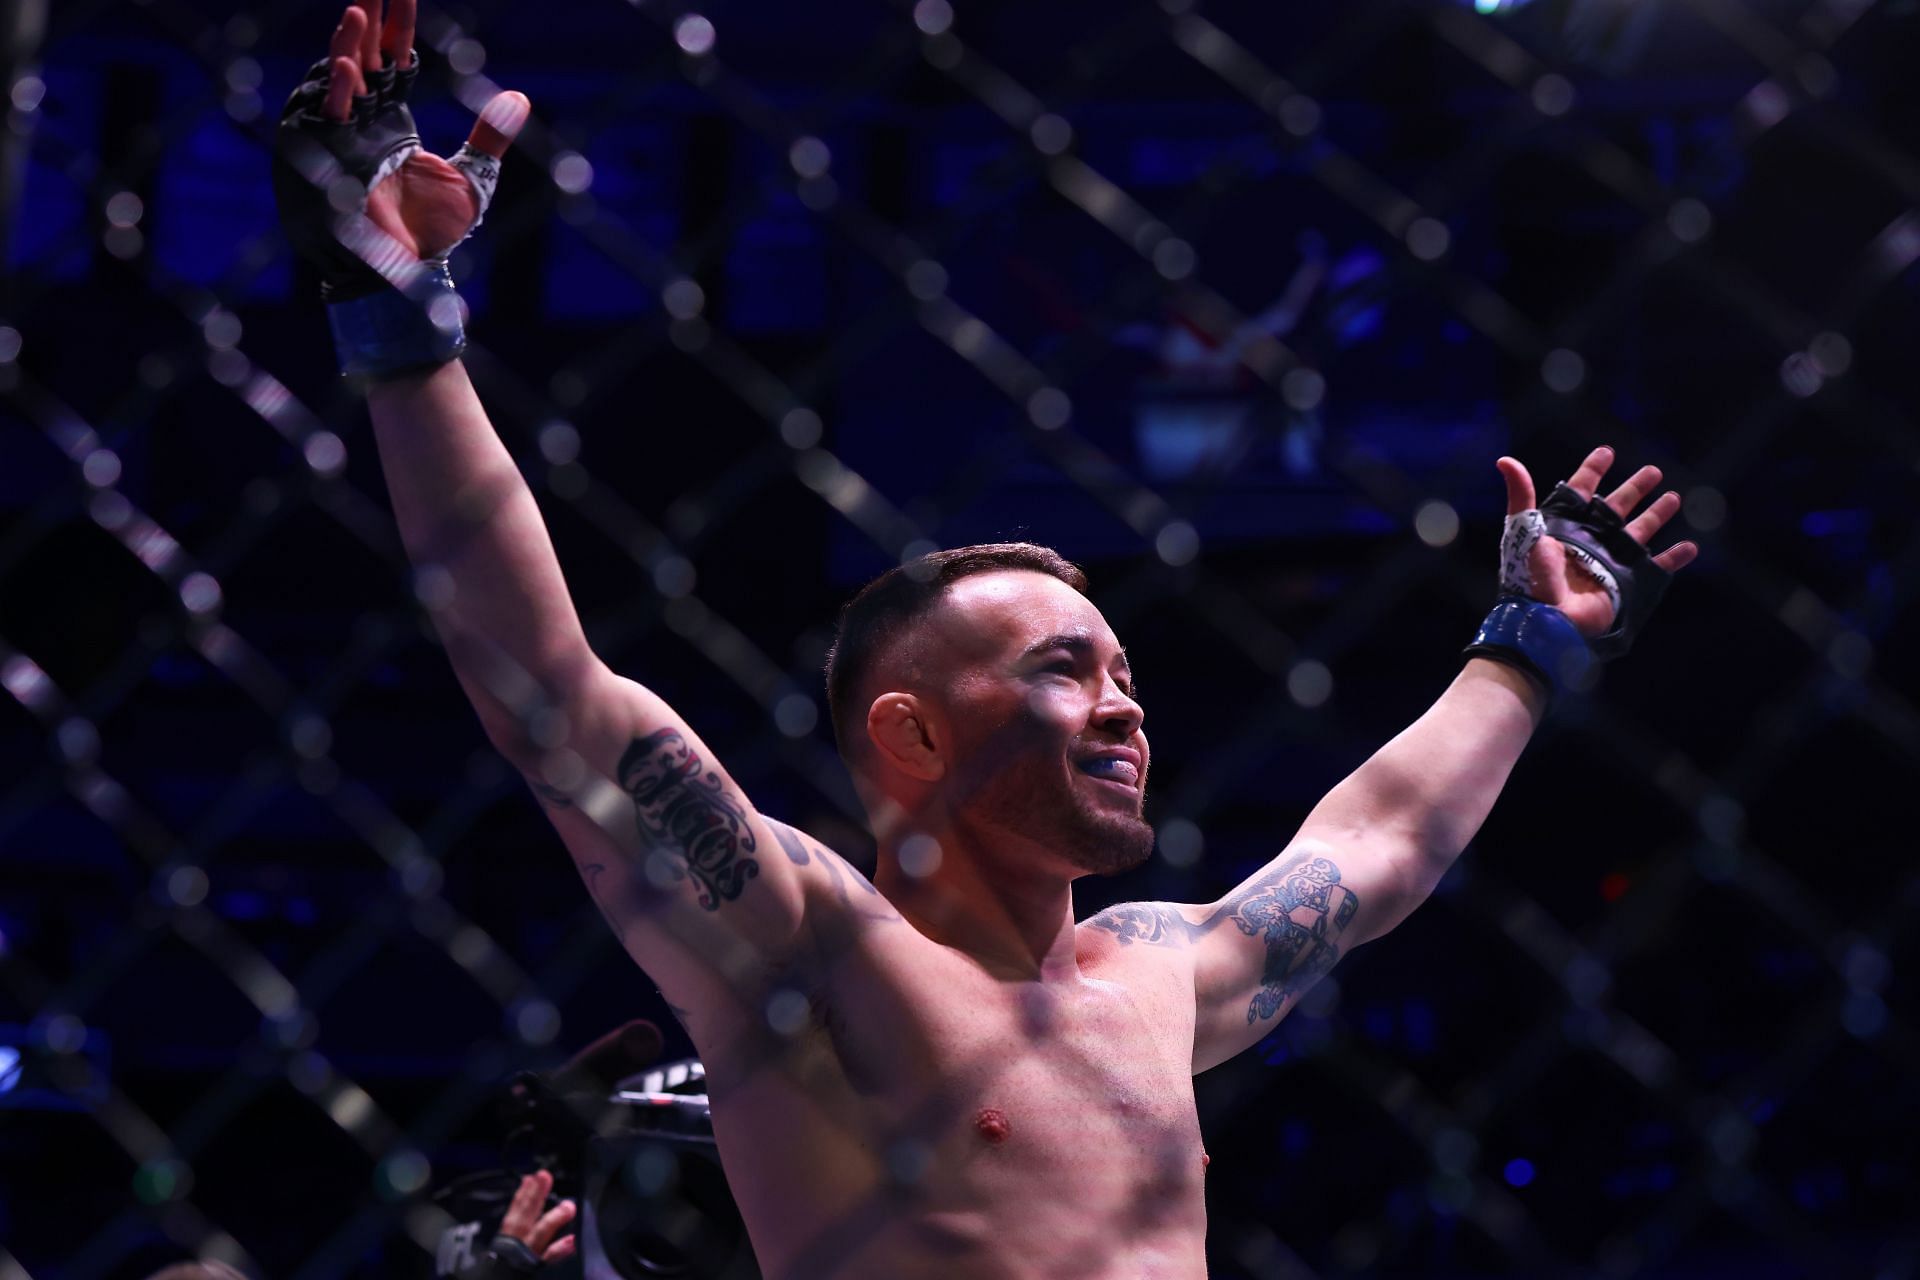 UFC fans would love to see a grudge match between Colby Covington and Jorge Masvidal in 2022/